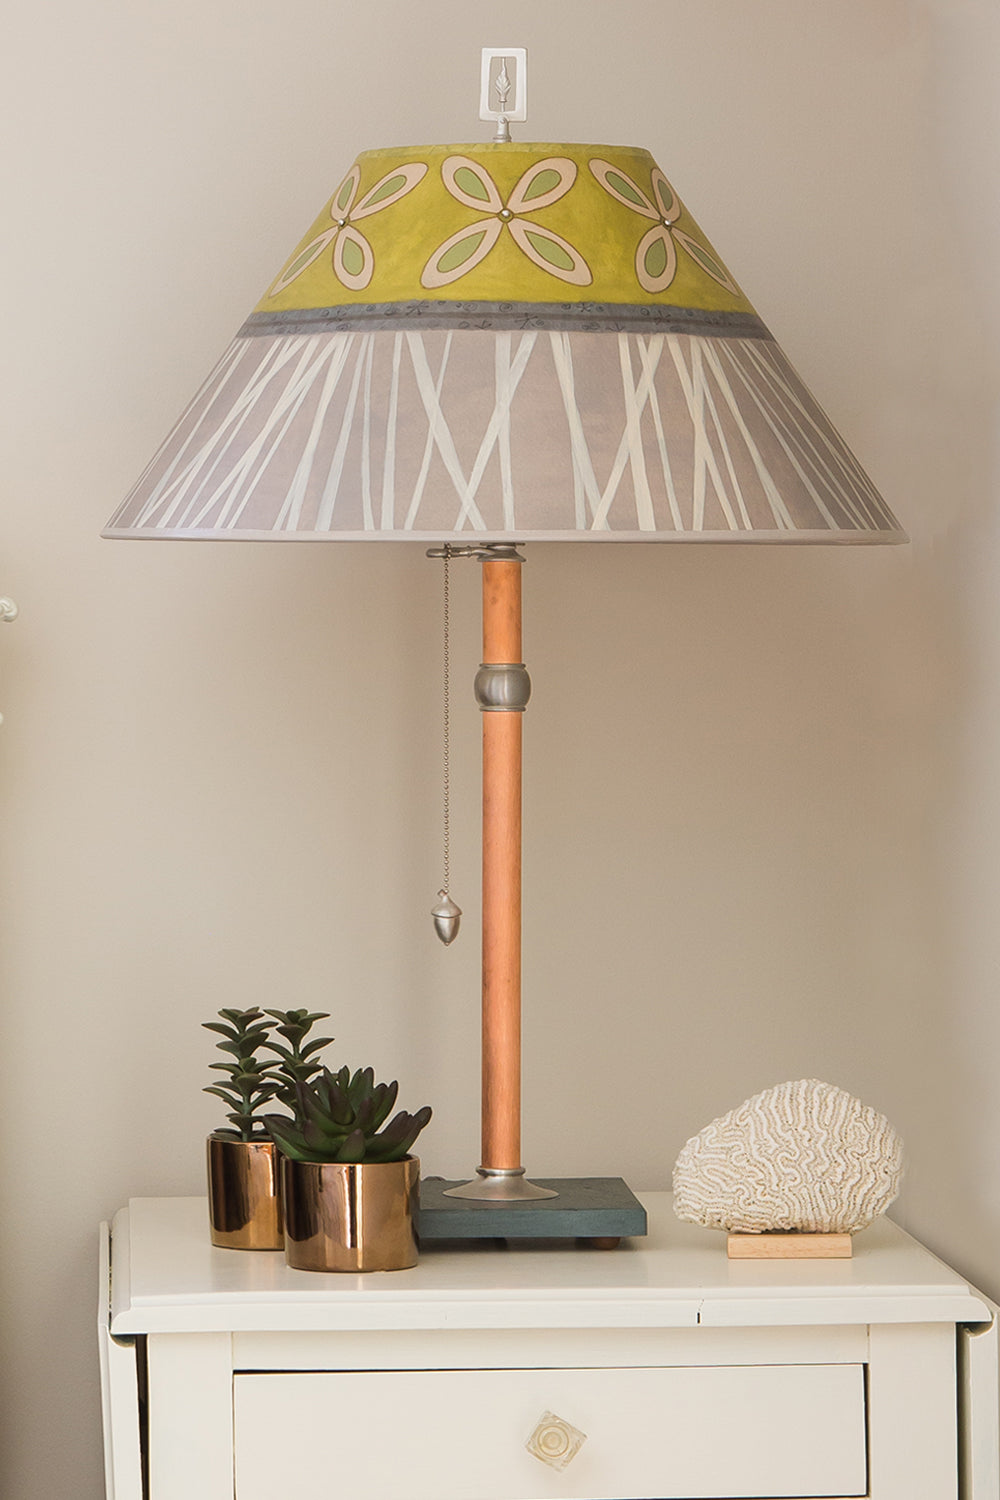 Janna Ugone & Co Table Lamps Copper Table Lamp with Large Conical Shade in Kiwi